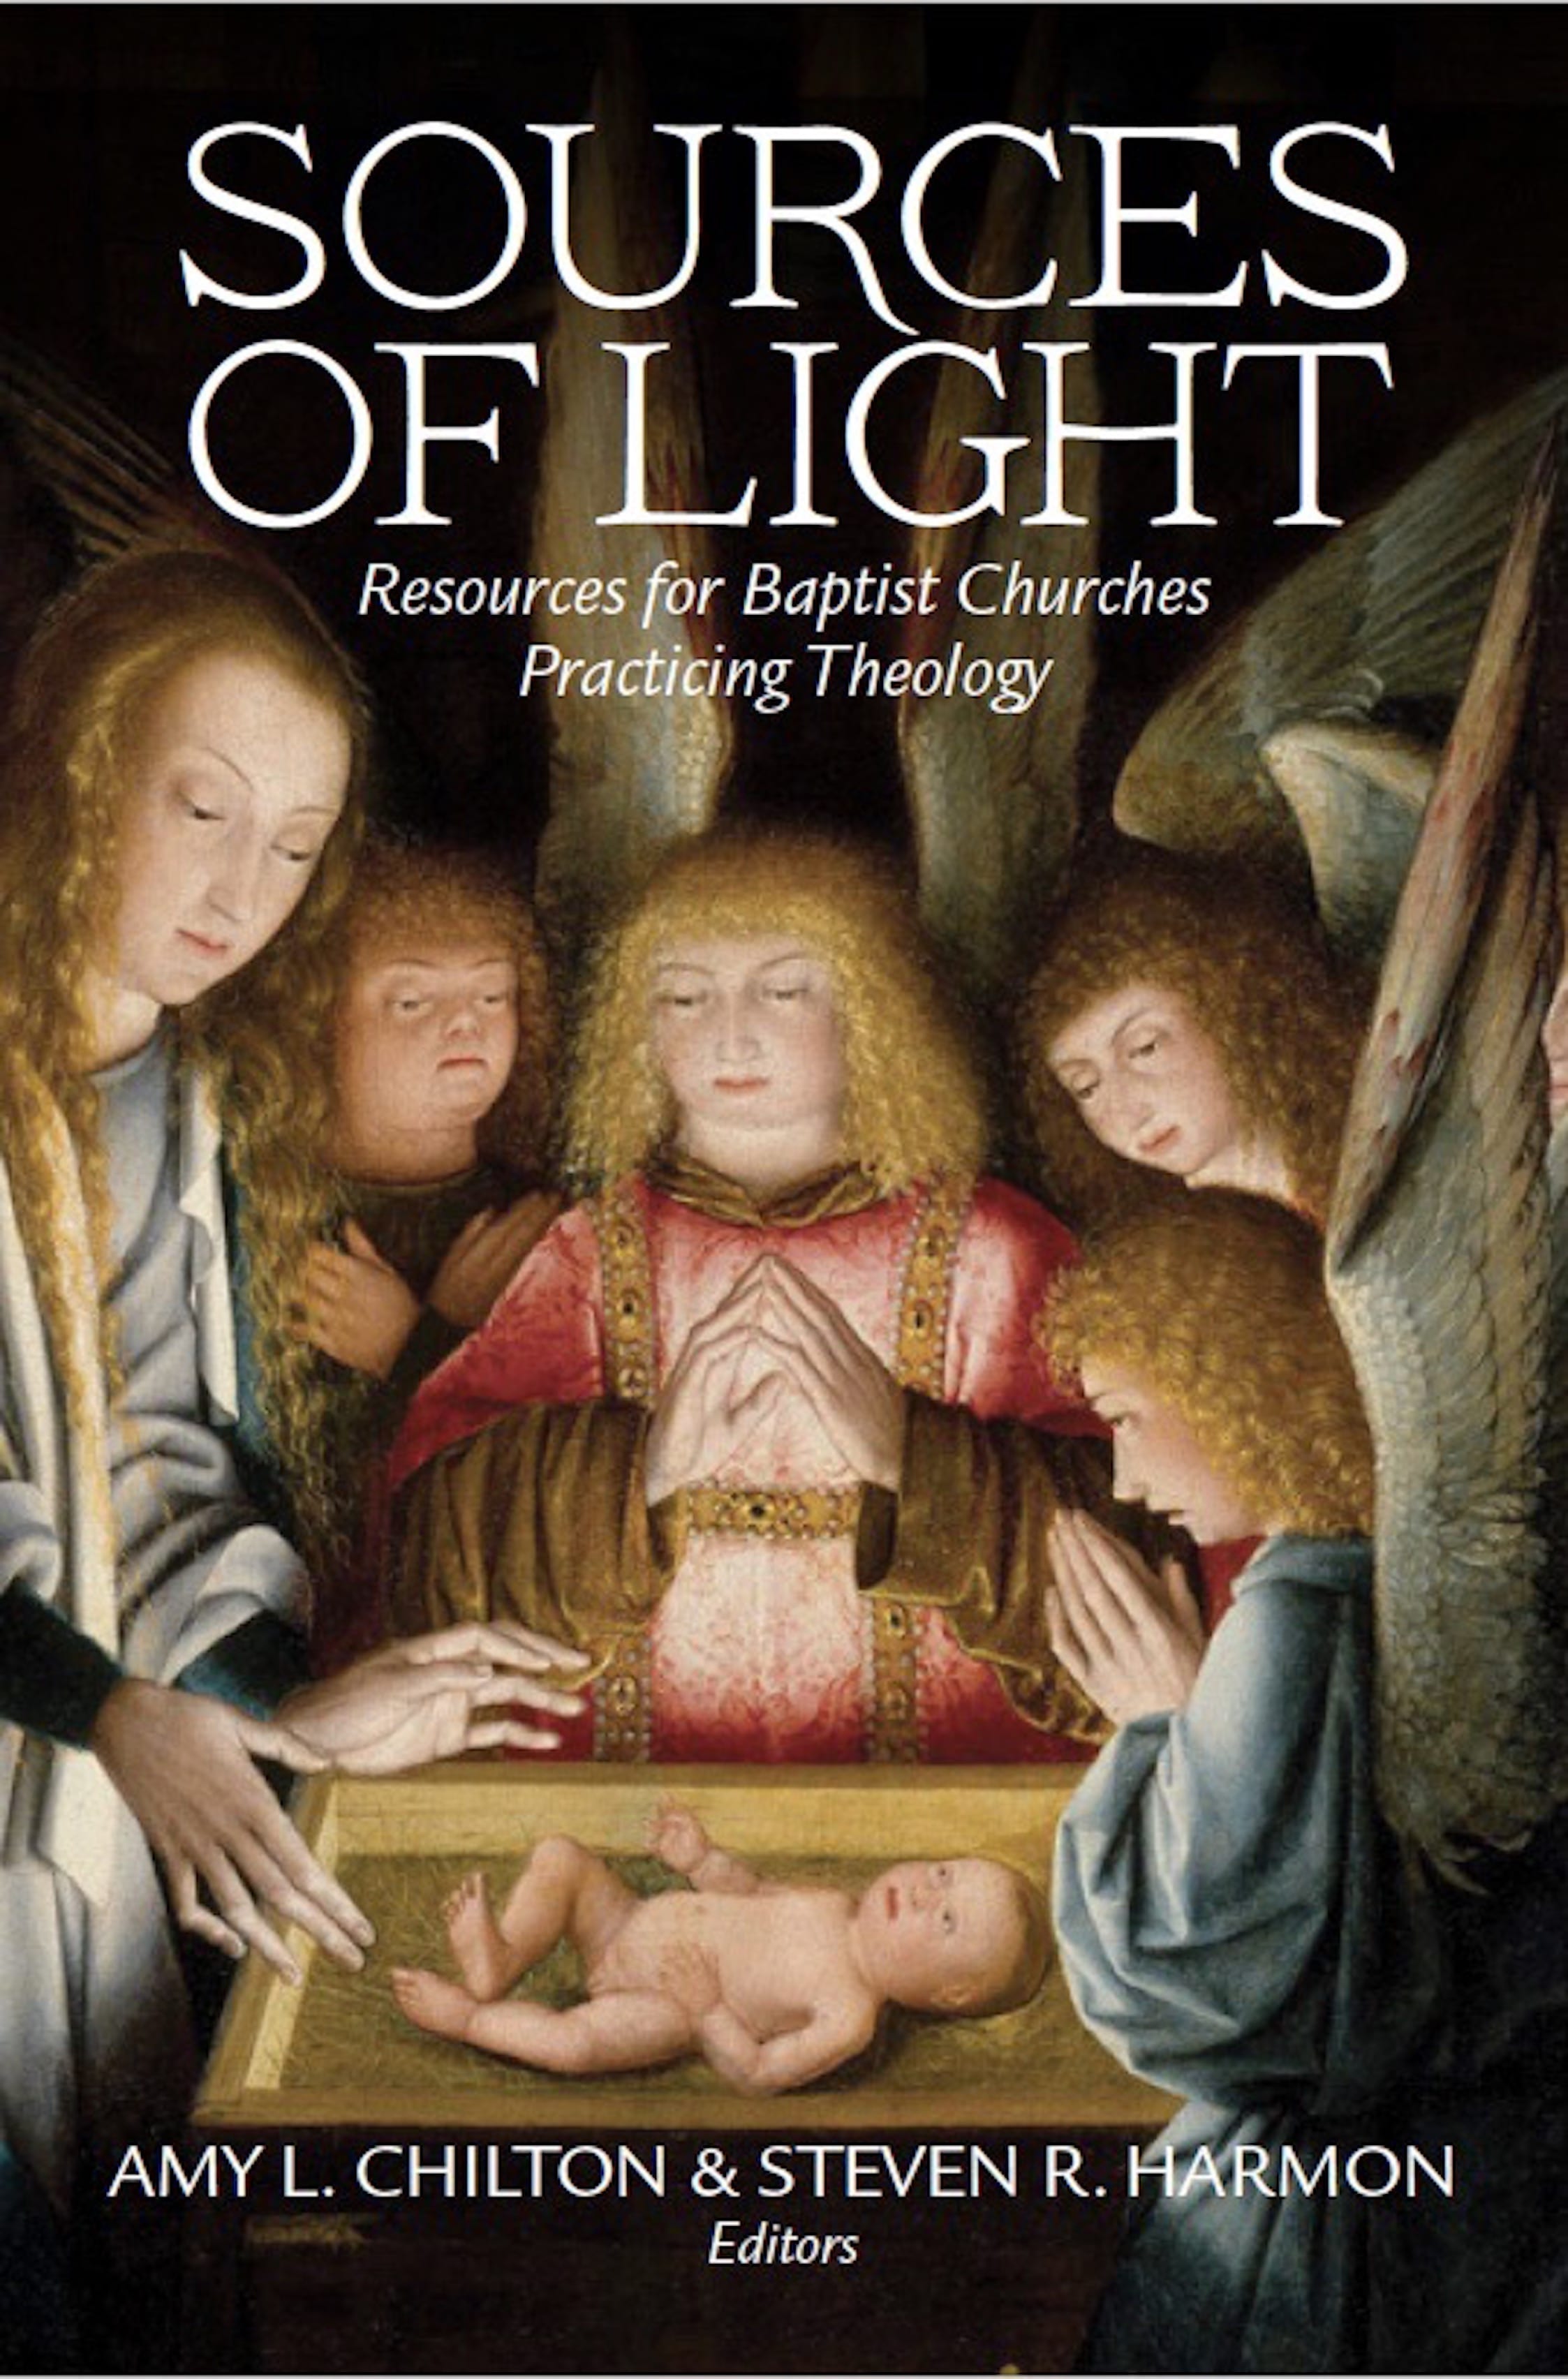 New Book: Sources of Light: Resources for Baptist Churches Practicing Theology